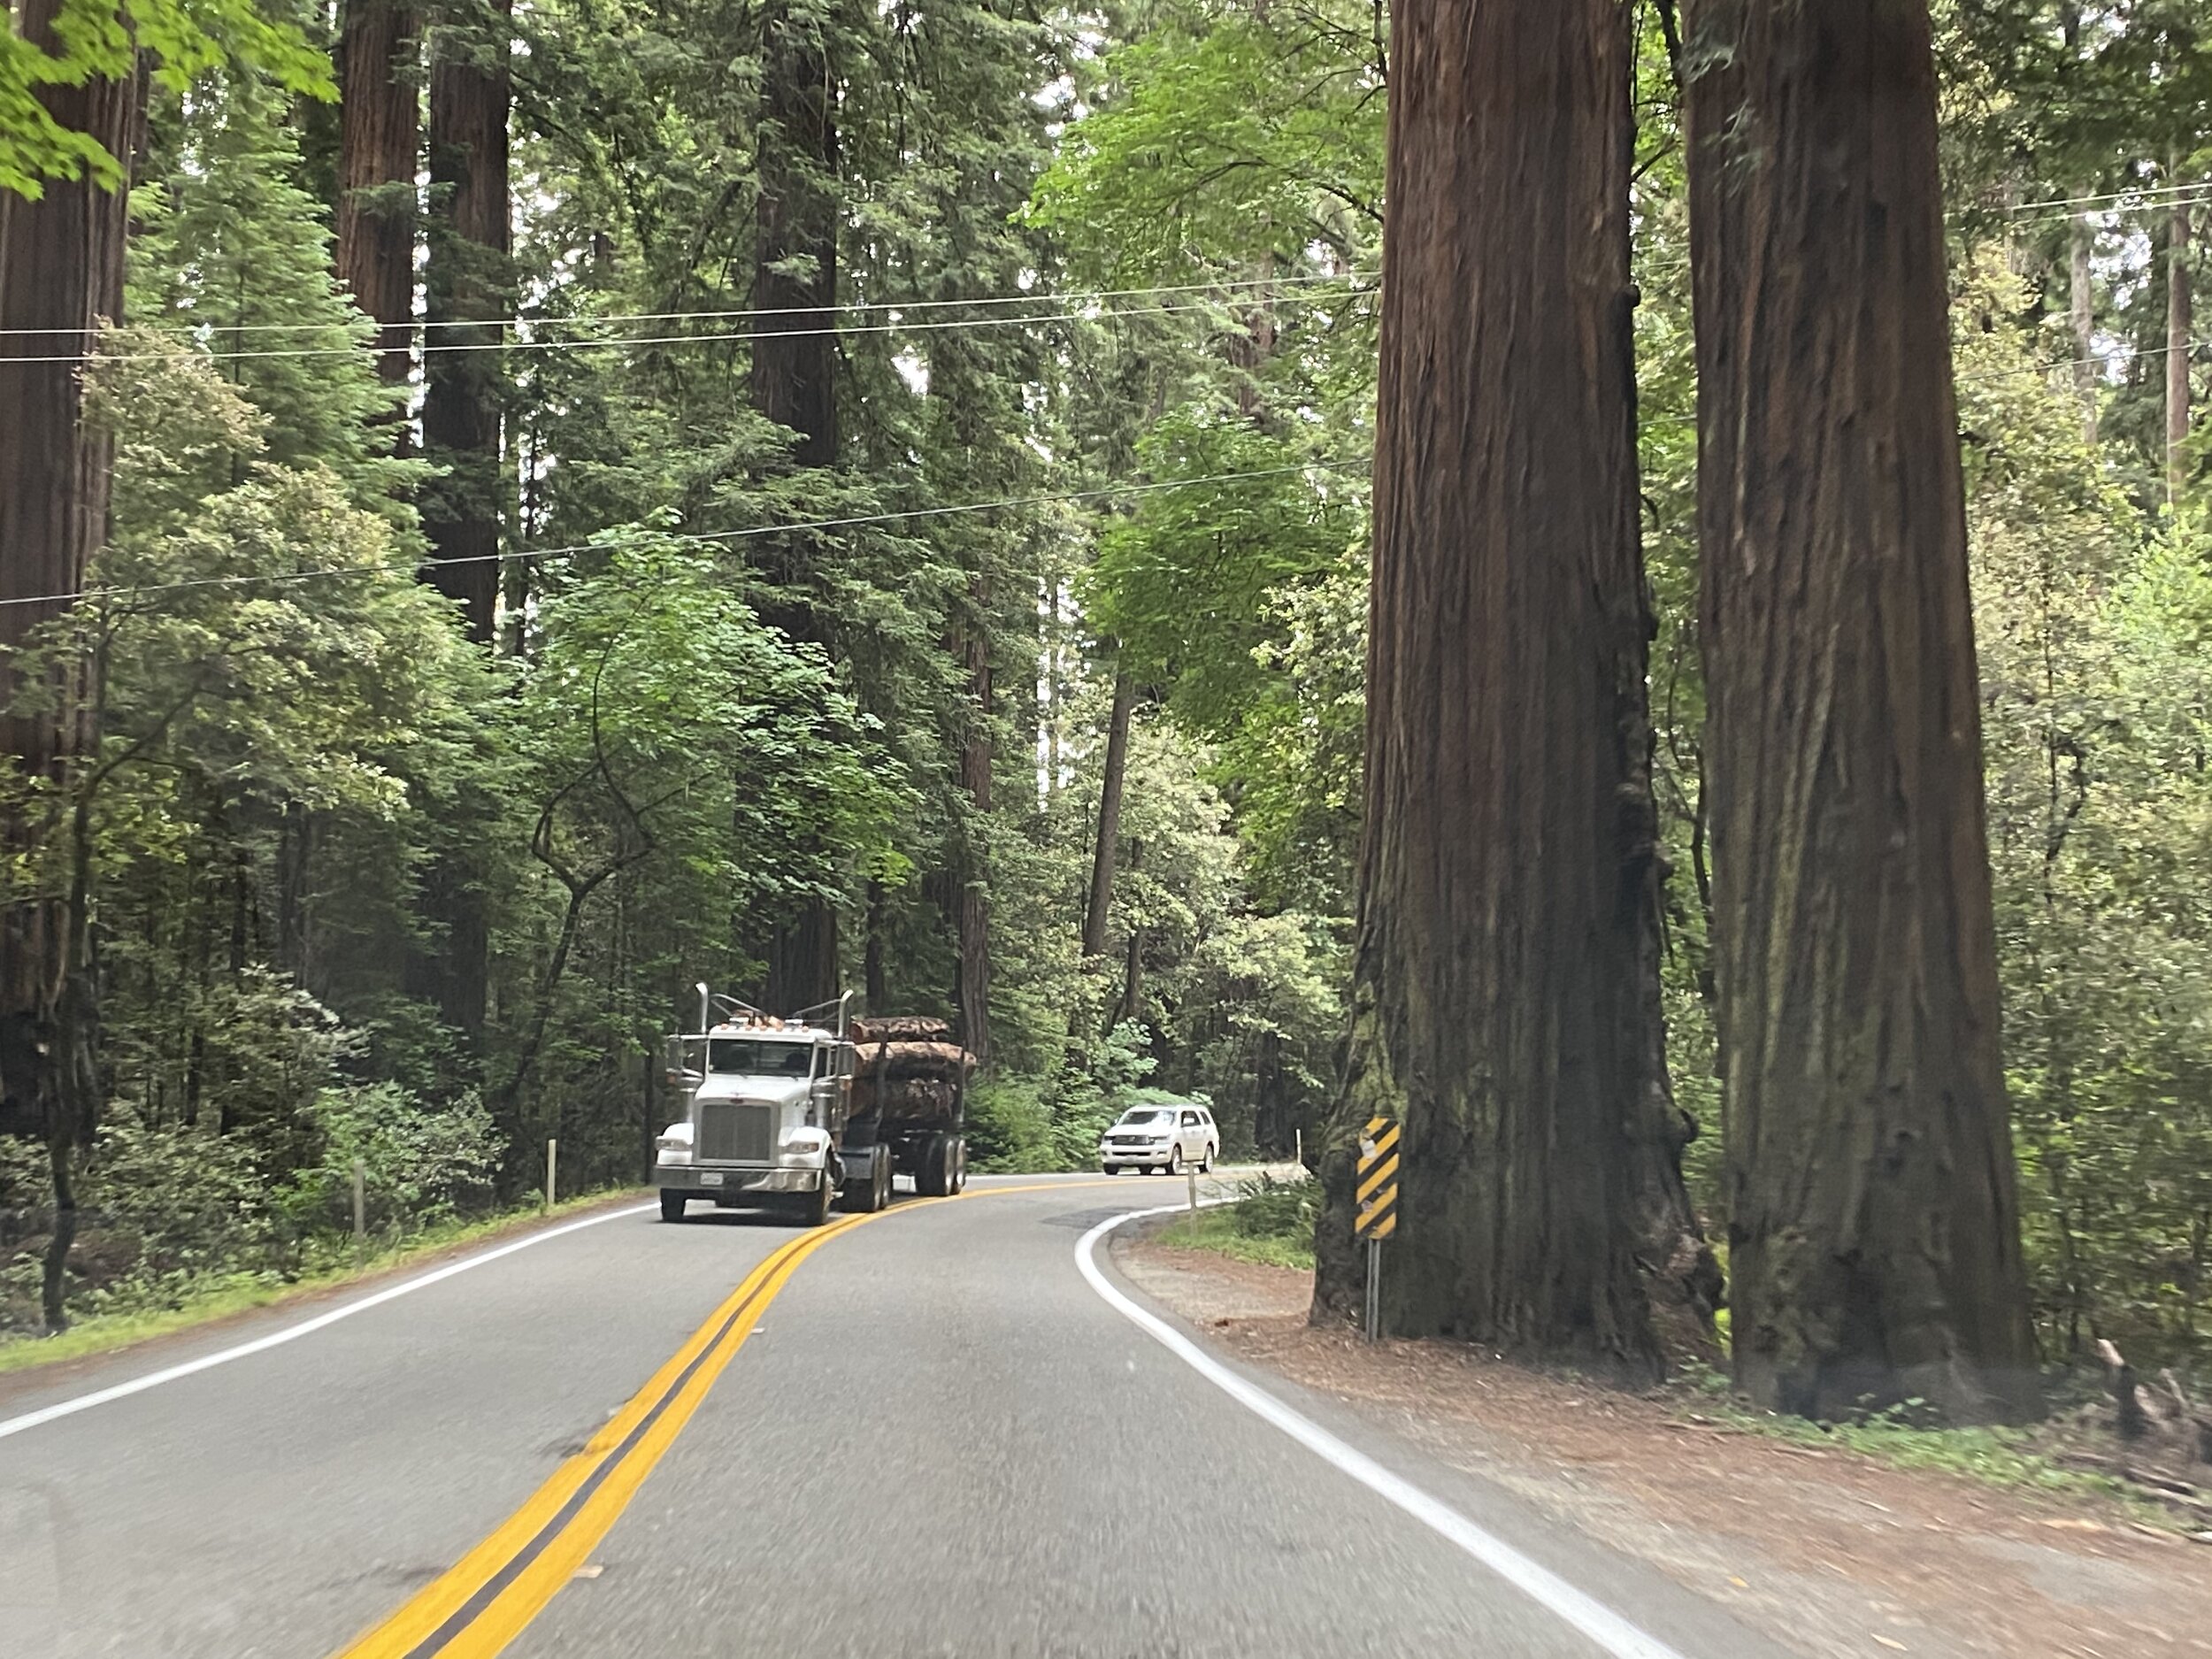 Thought this was a good comparison to check out... the trees on that lumber truck are pretty huge... and then you see that truck driving through the redwood forest and it looks like a small toy carrying matchsticks.